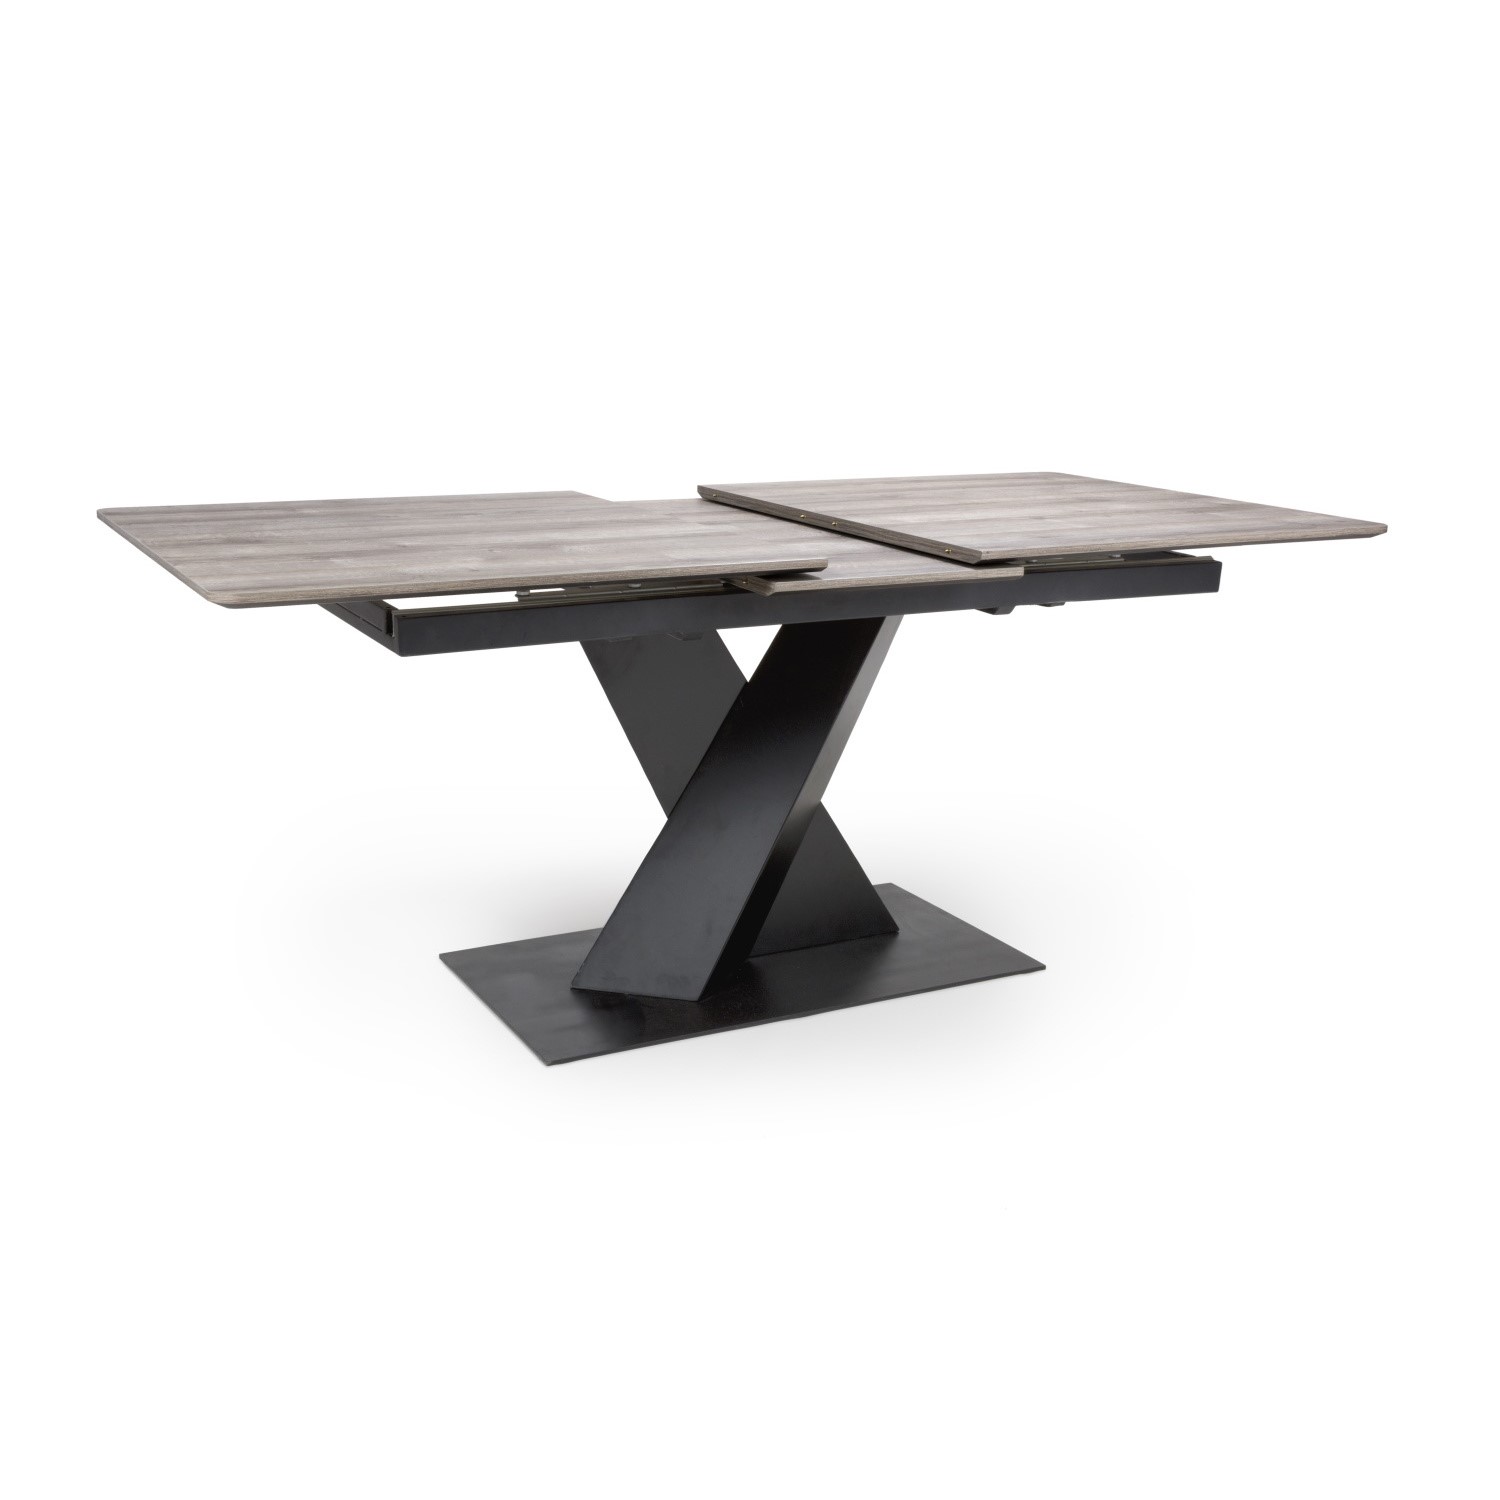 Read more about Large grey wood extendable dining table seats 4-6 asher